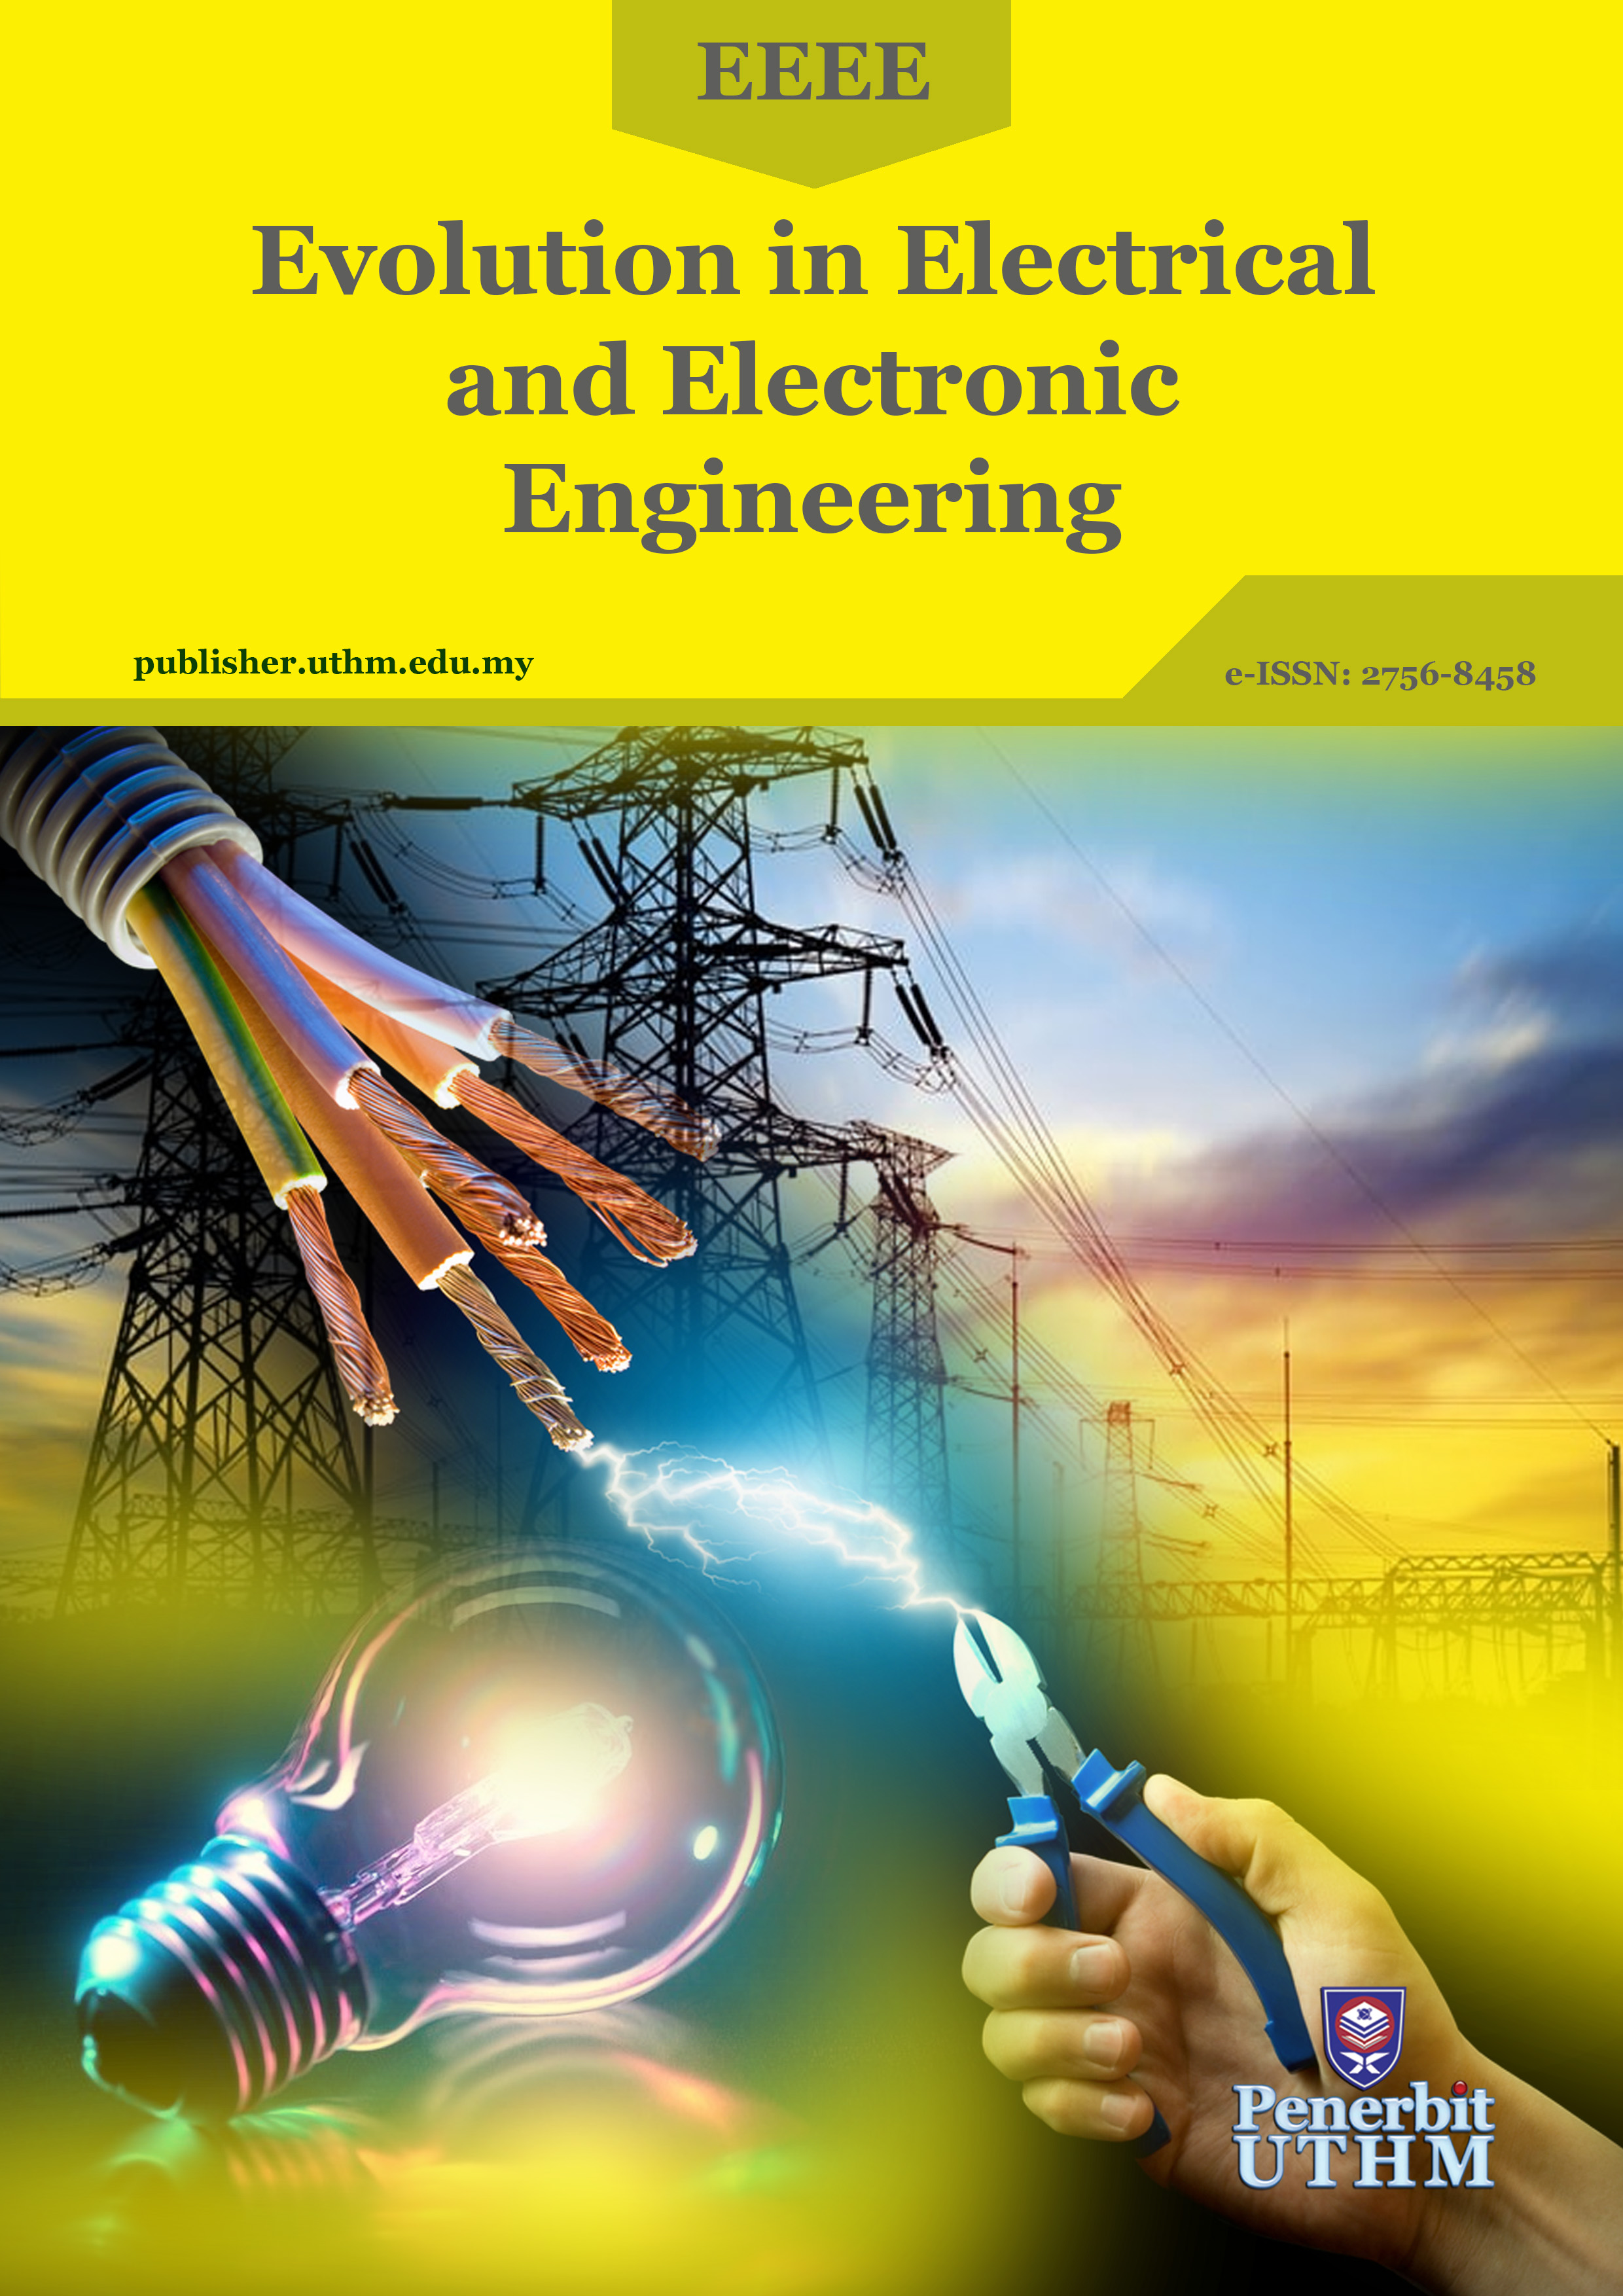 Evolution in Electrical and Electronic Engineering